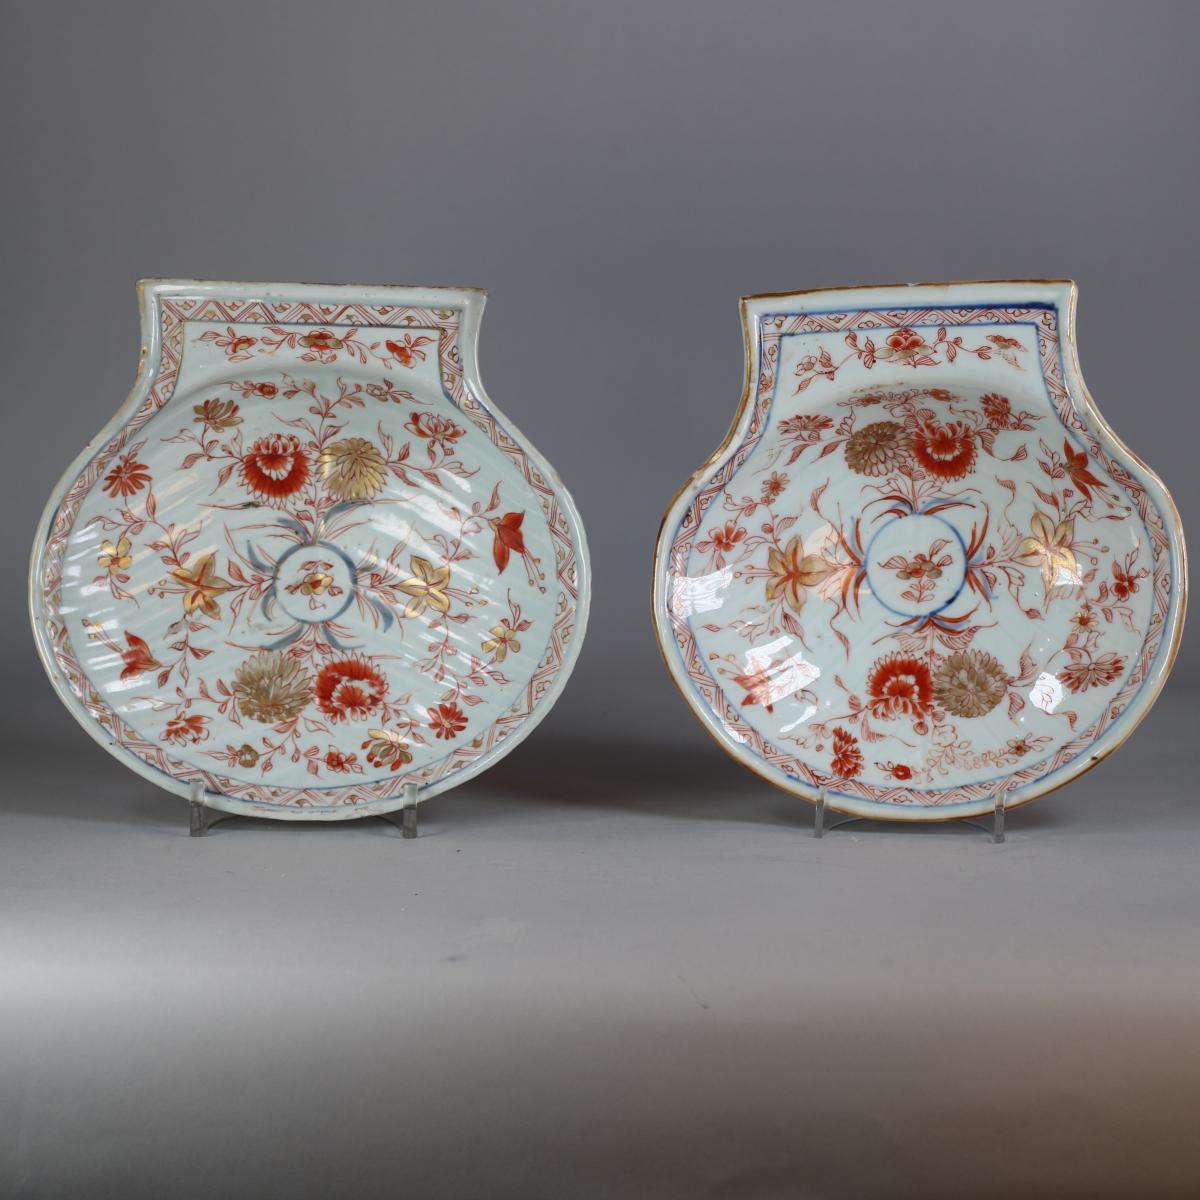 Pair of Chinese rouge-de-fer moulded shell-shaped dishes, Kangxi (1662-1722)